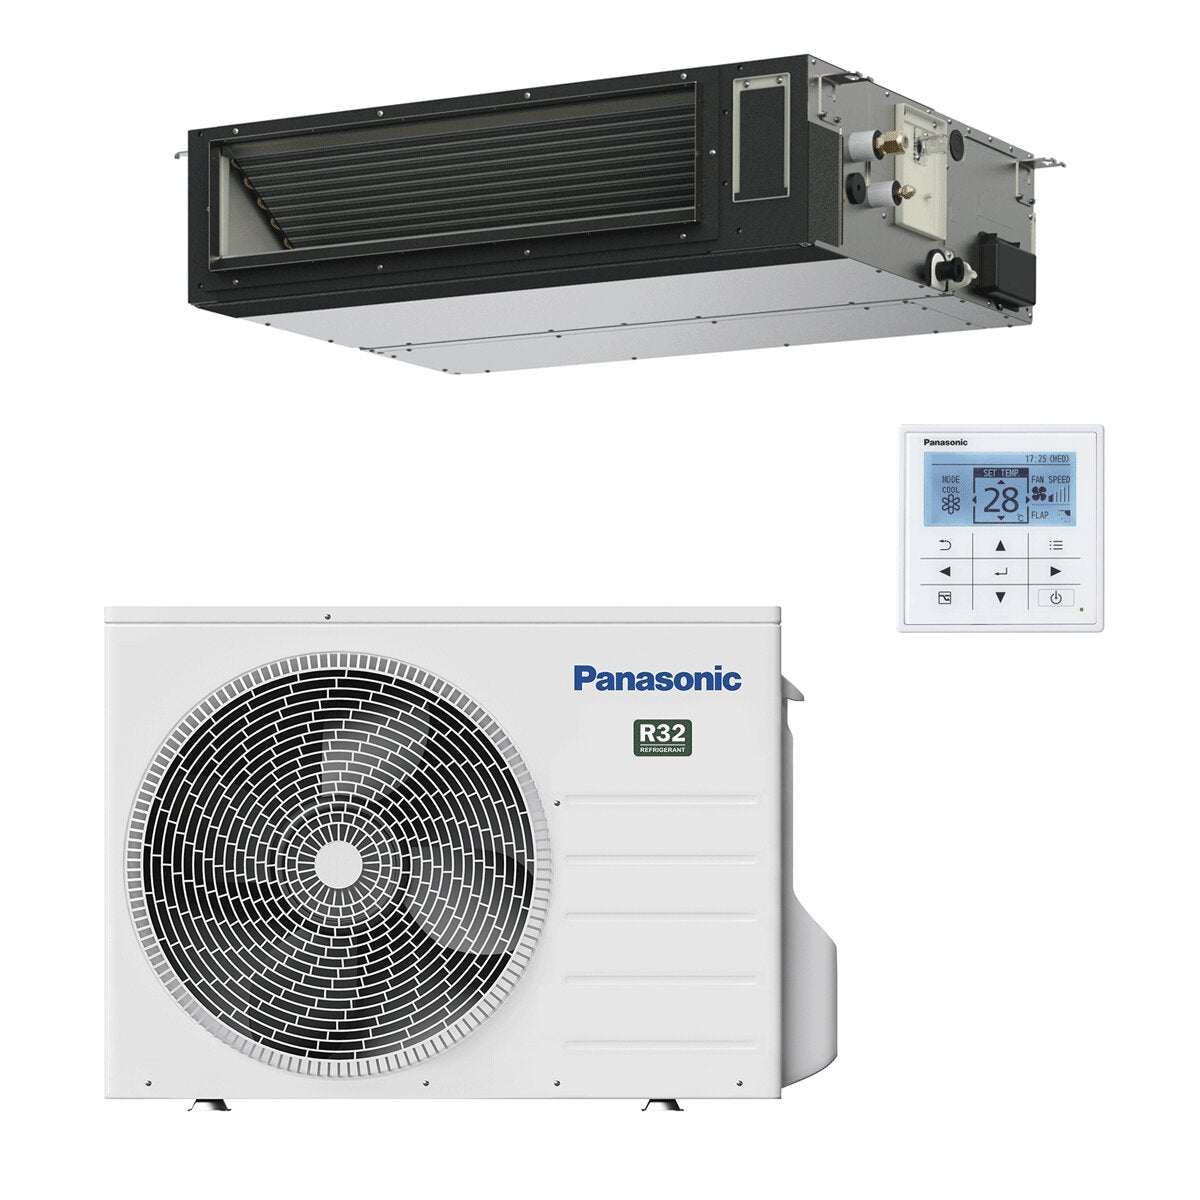 Panasonic PACi NX Standard Ducted Air Conditioner 18000 BTU R32 Inverter A++/A+